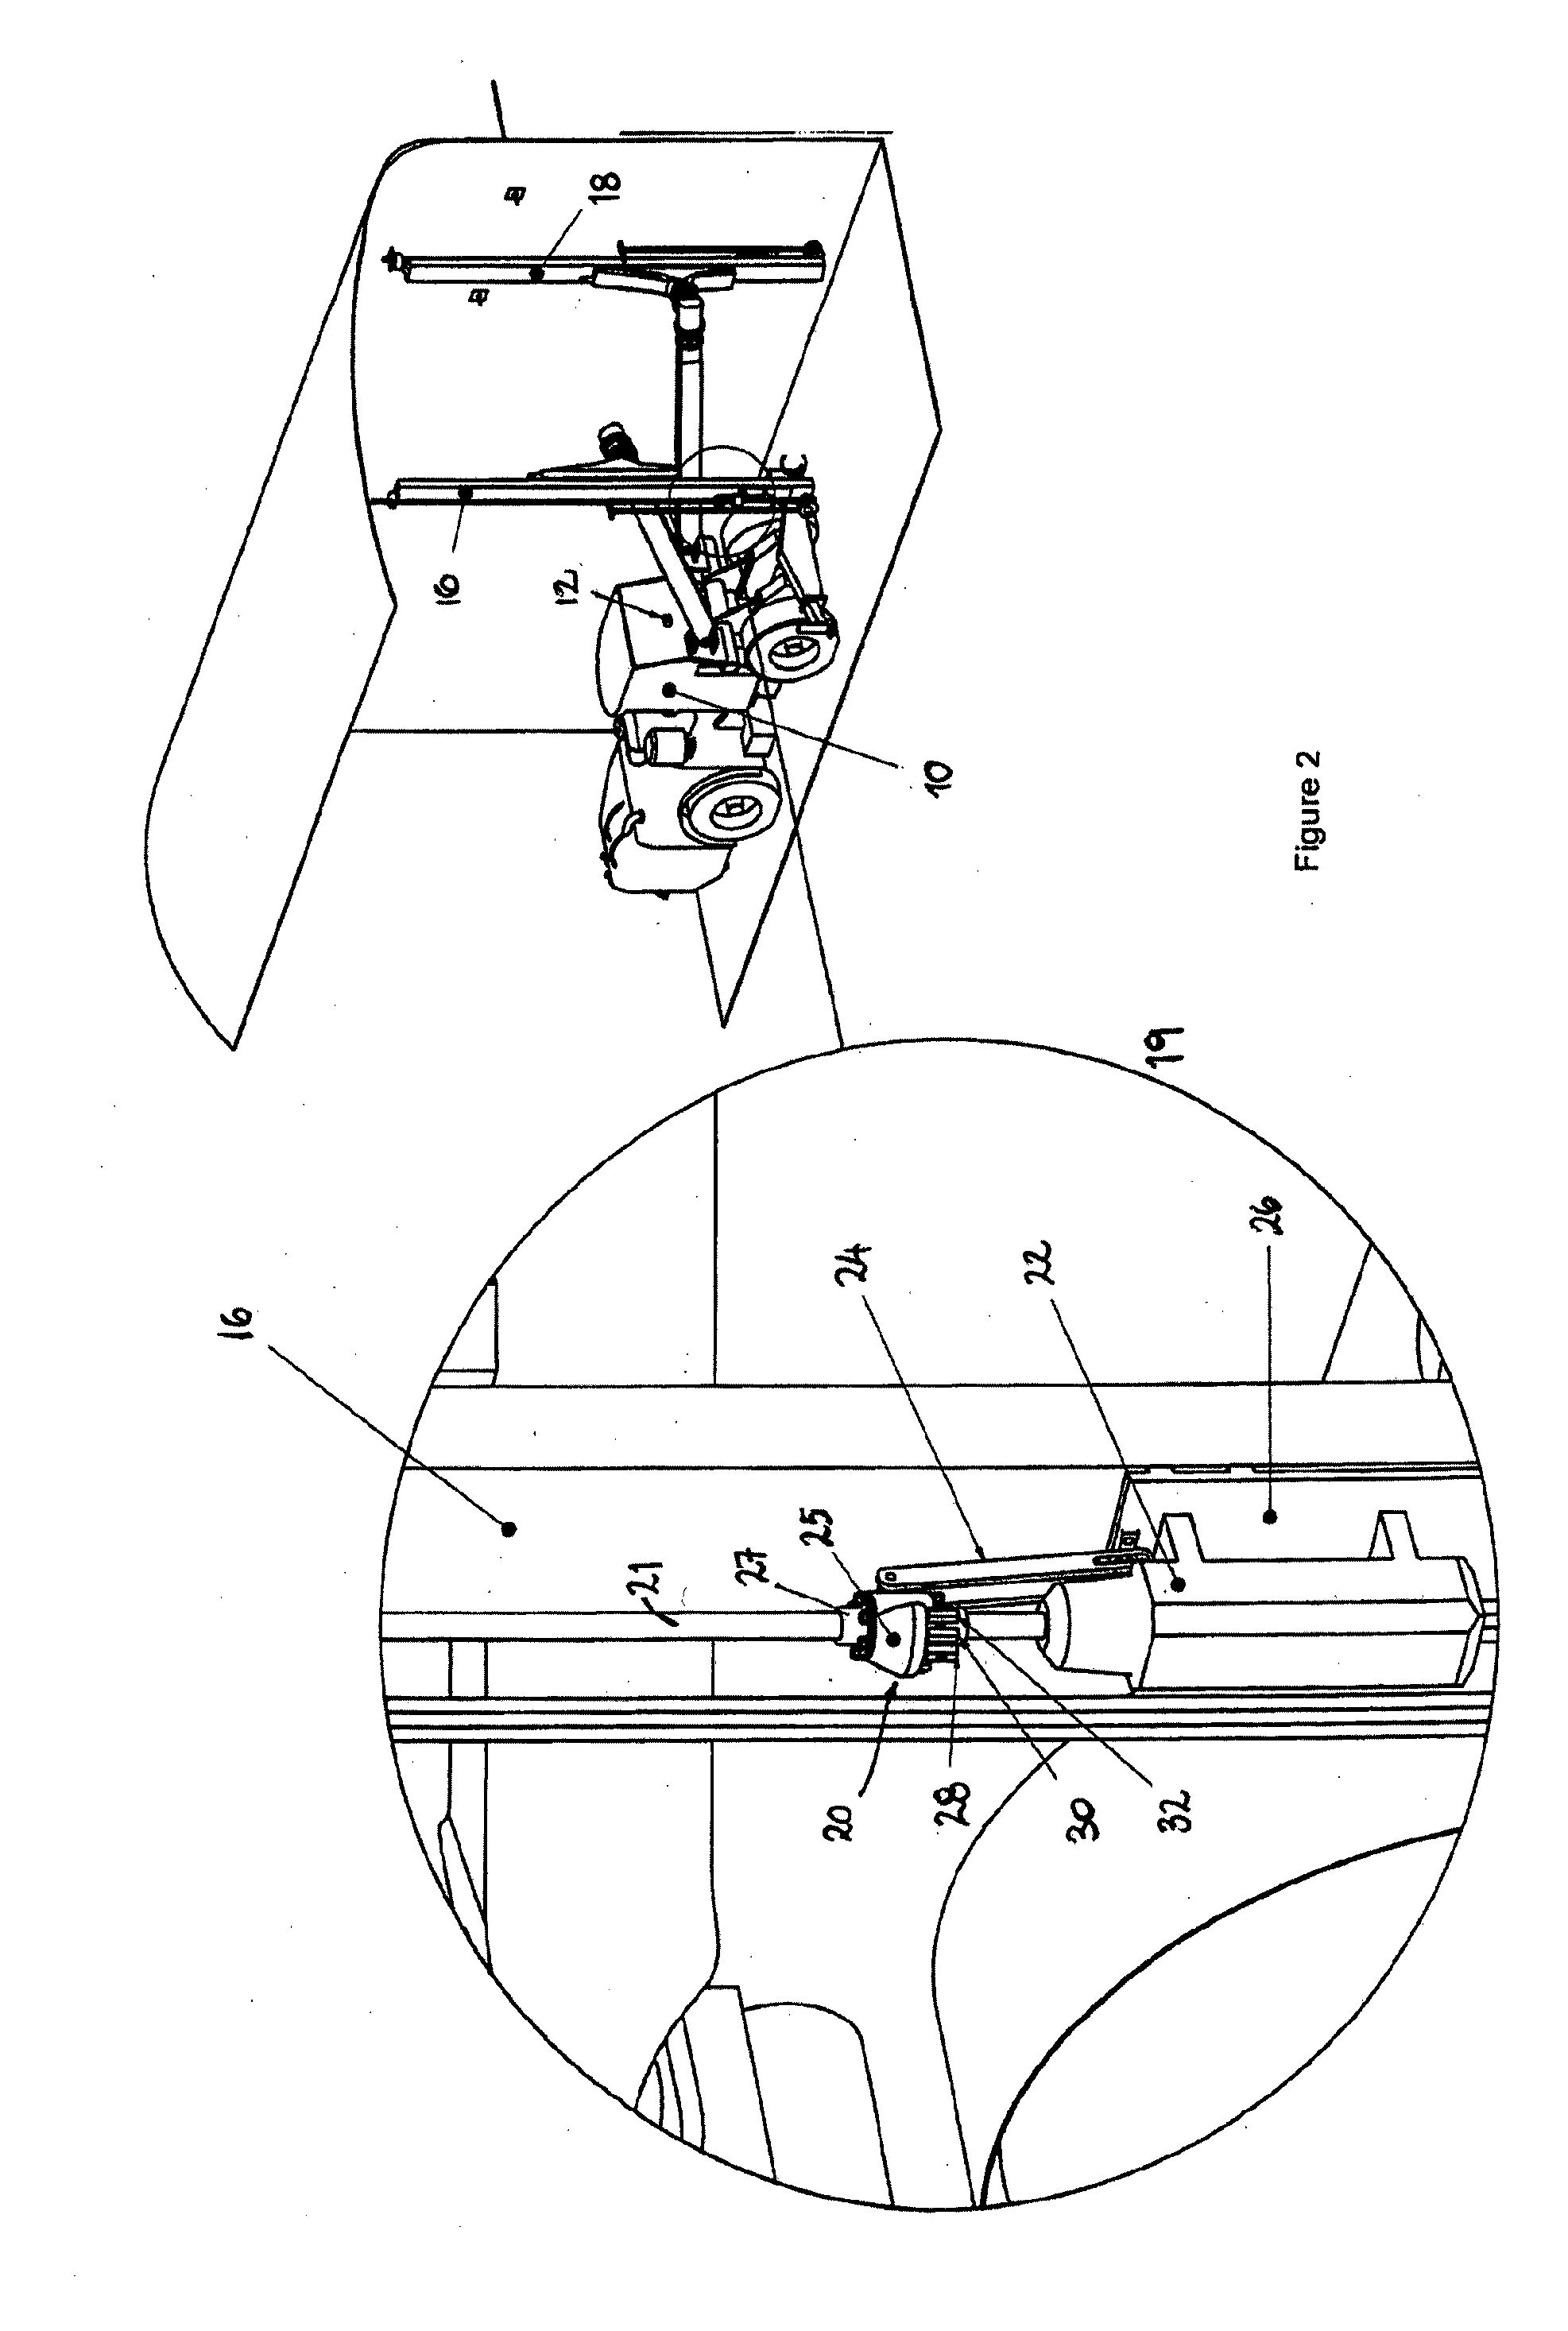 Resin injection apparatus for drilling apparatus for installing a ground anchor